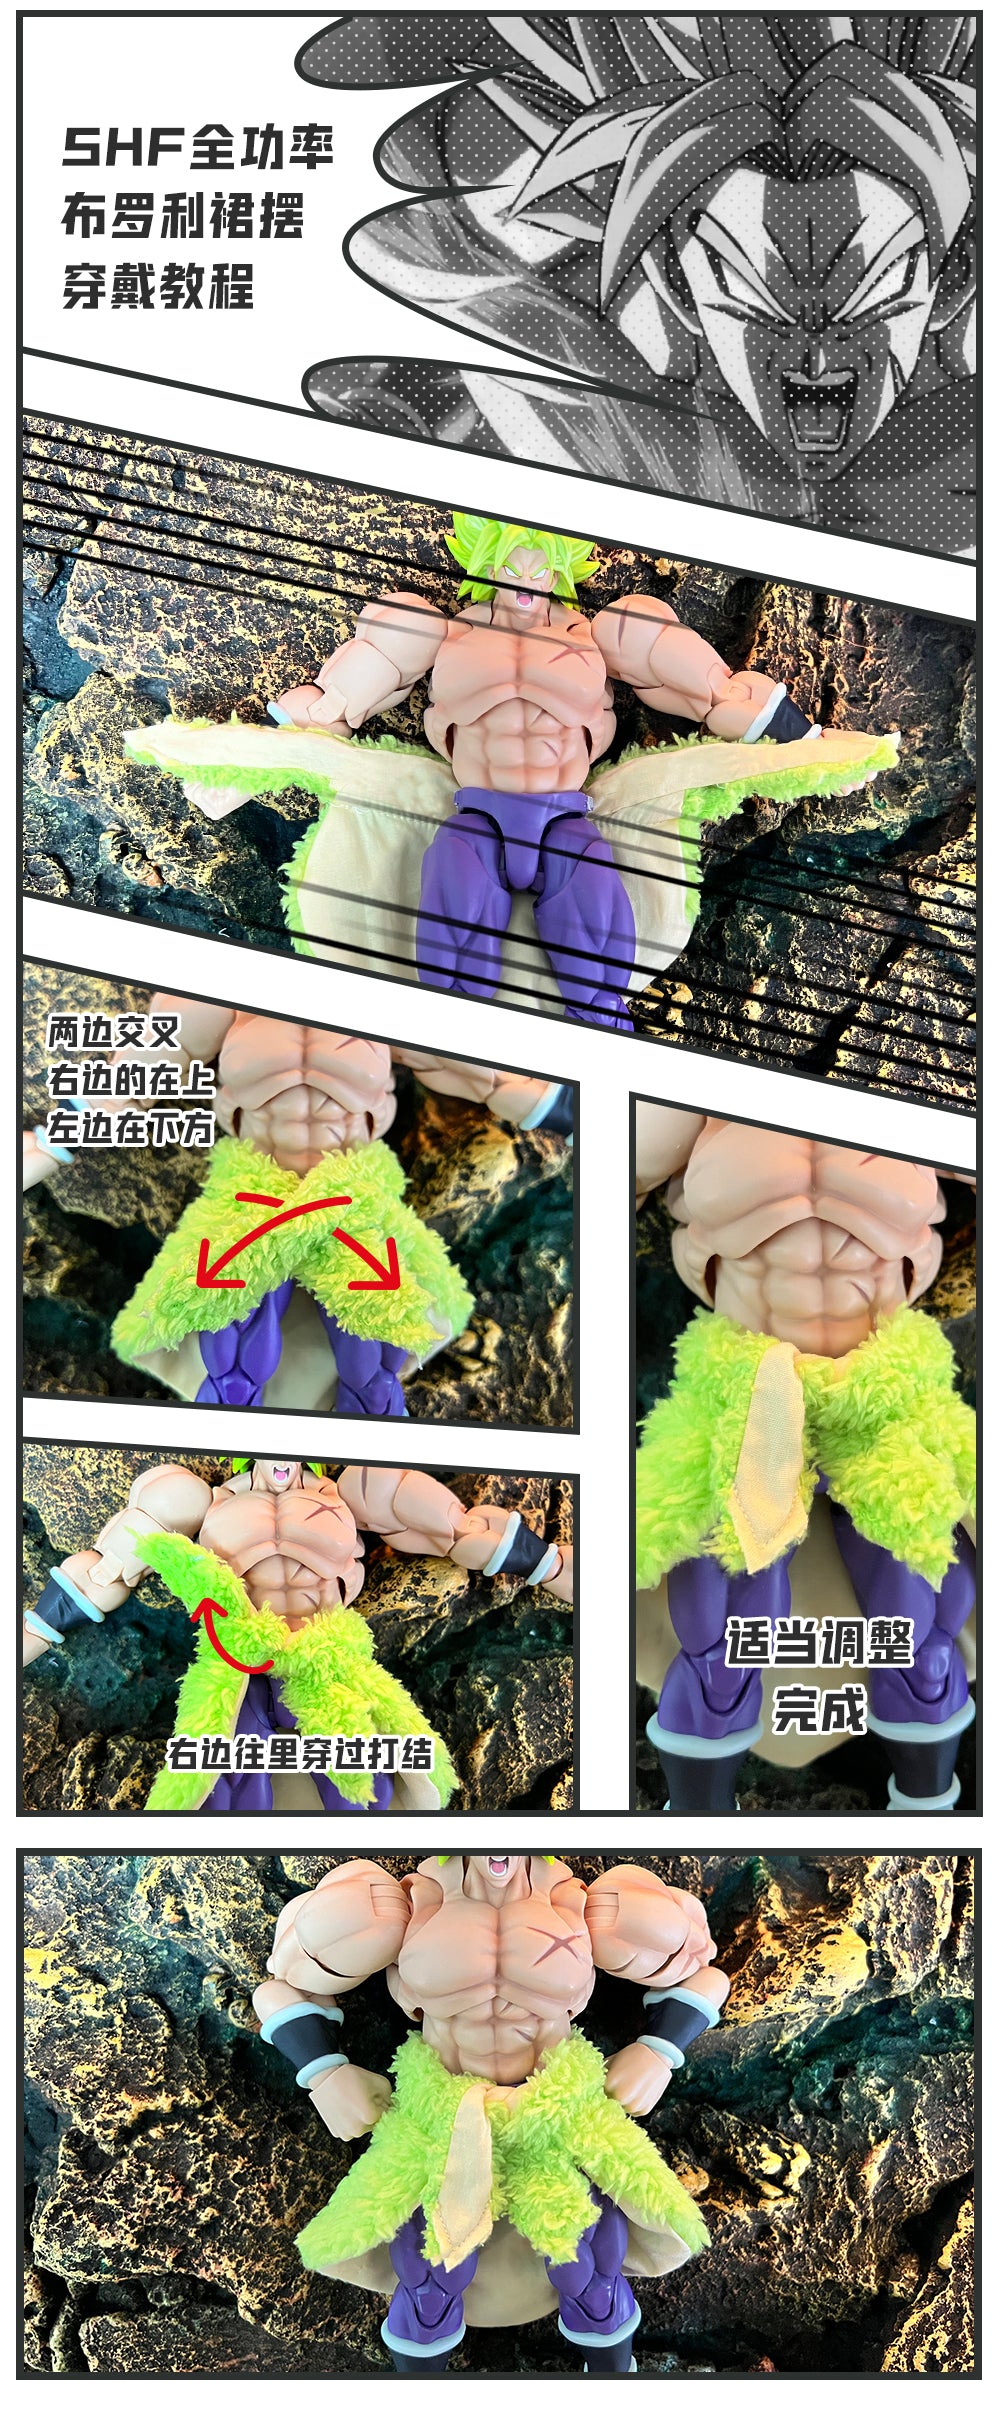 S.H.Figuarts SHF Broly Skirt 1/12